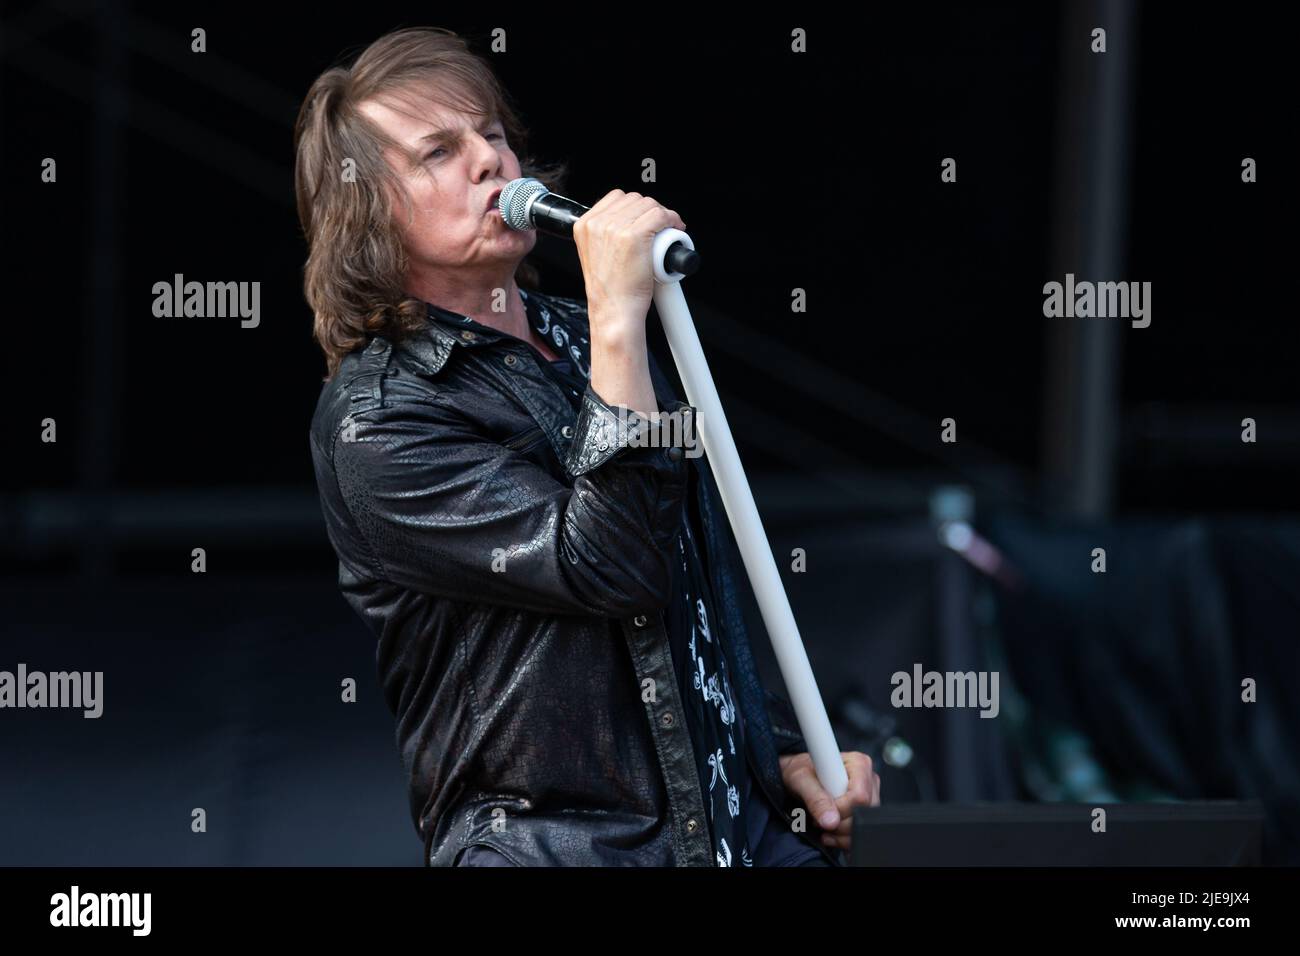 Oslo, Norway. 23rd, June 2022. The Swedish glam rock band Europe performs a live concert during the Norwegian music festival Tons of Rock 2022 in Oslo. Here vocalist Joey Tempest is seen live on stage. (Photo credit: Gonzales Photo - Per-Otto Oppi). Stock Photo